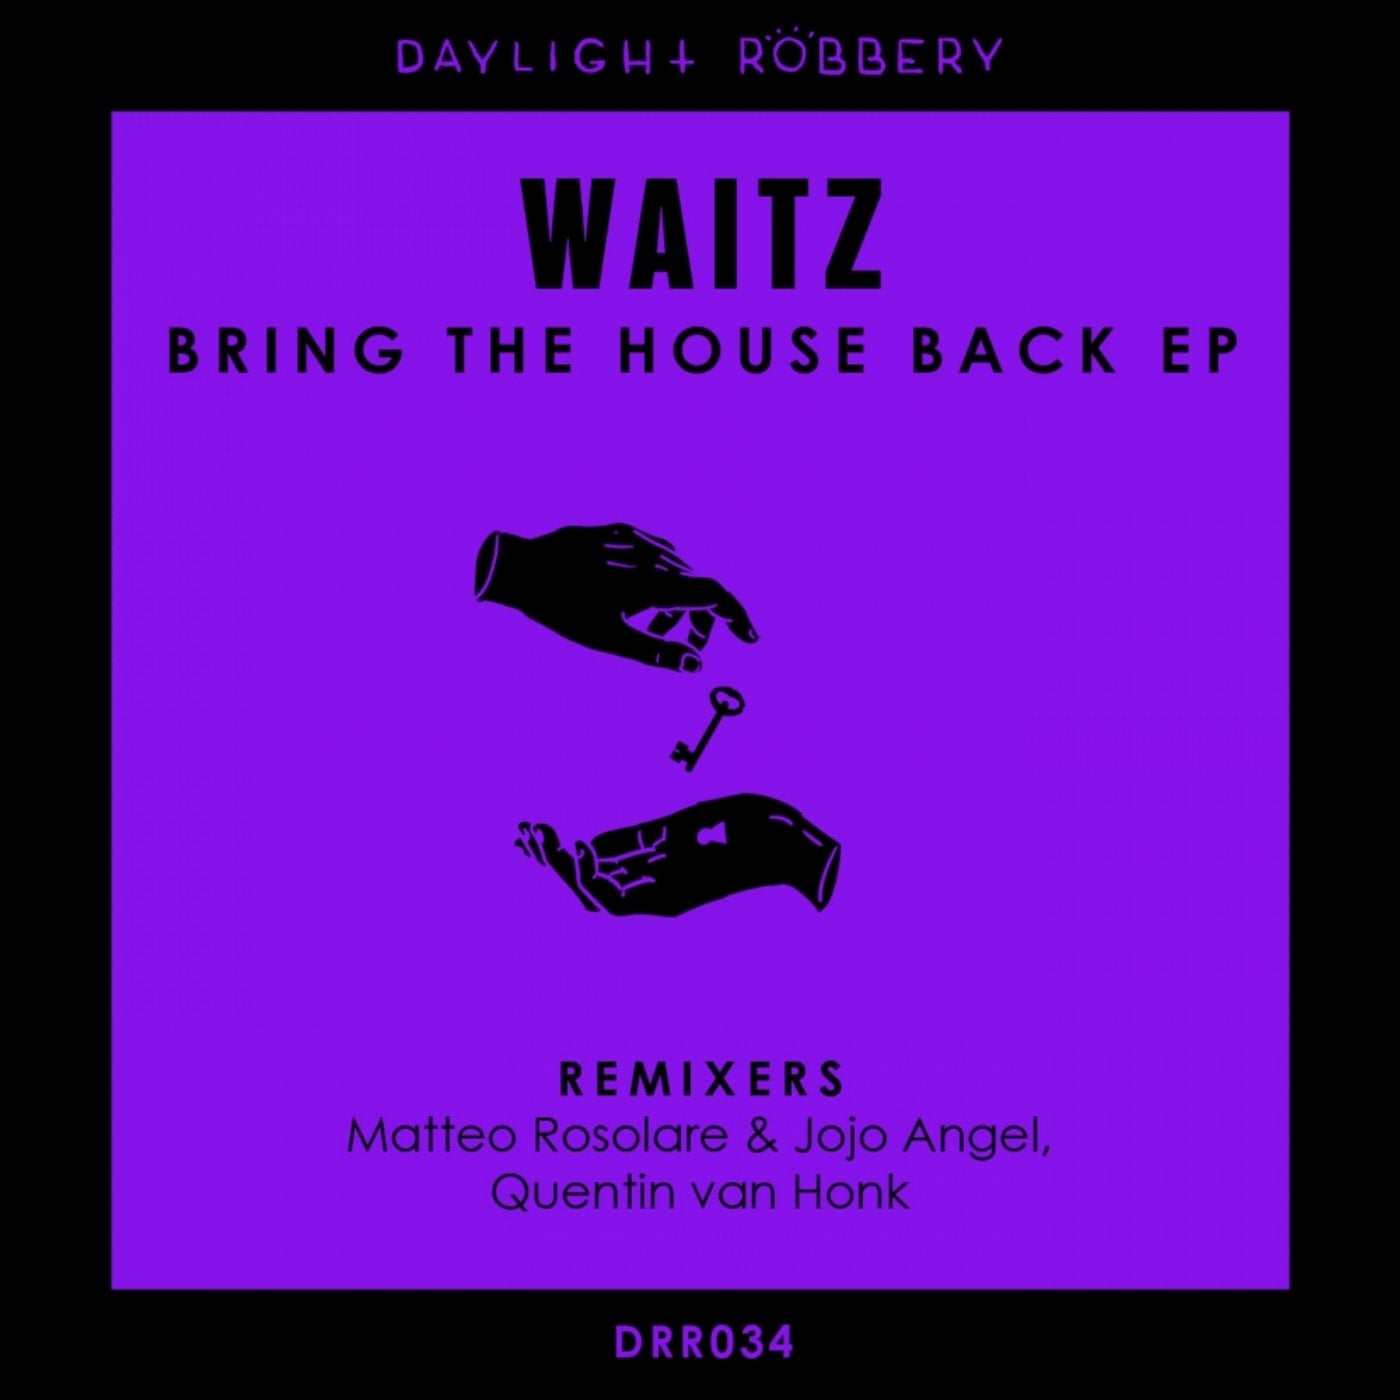 Bring The House Back EP